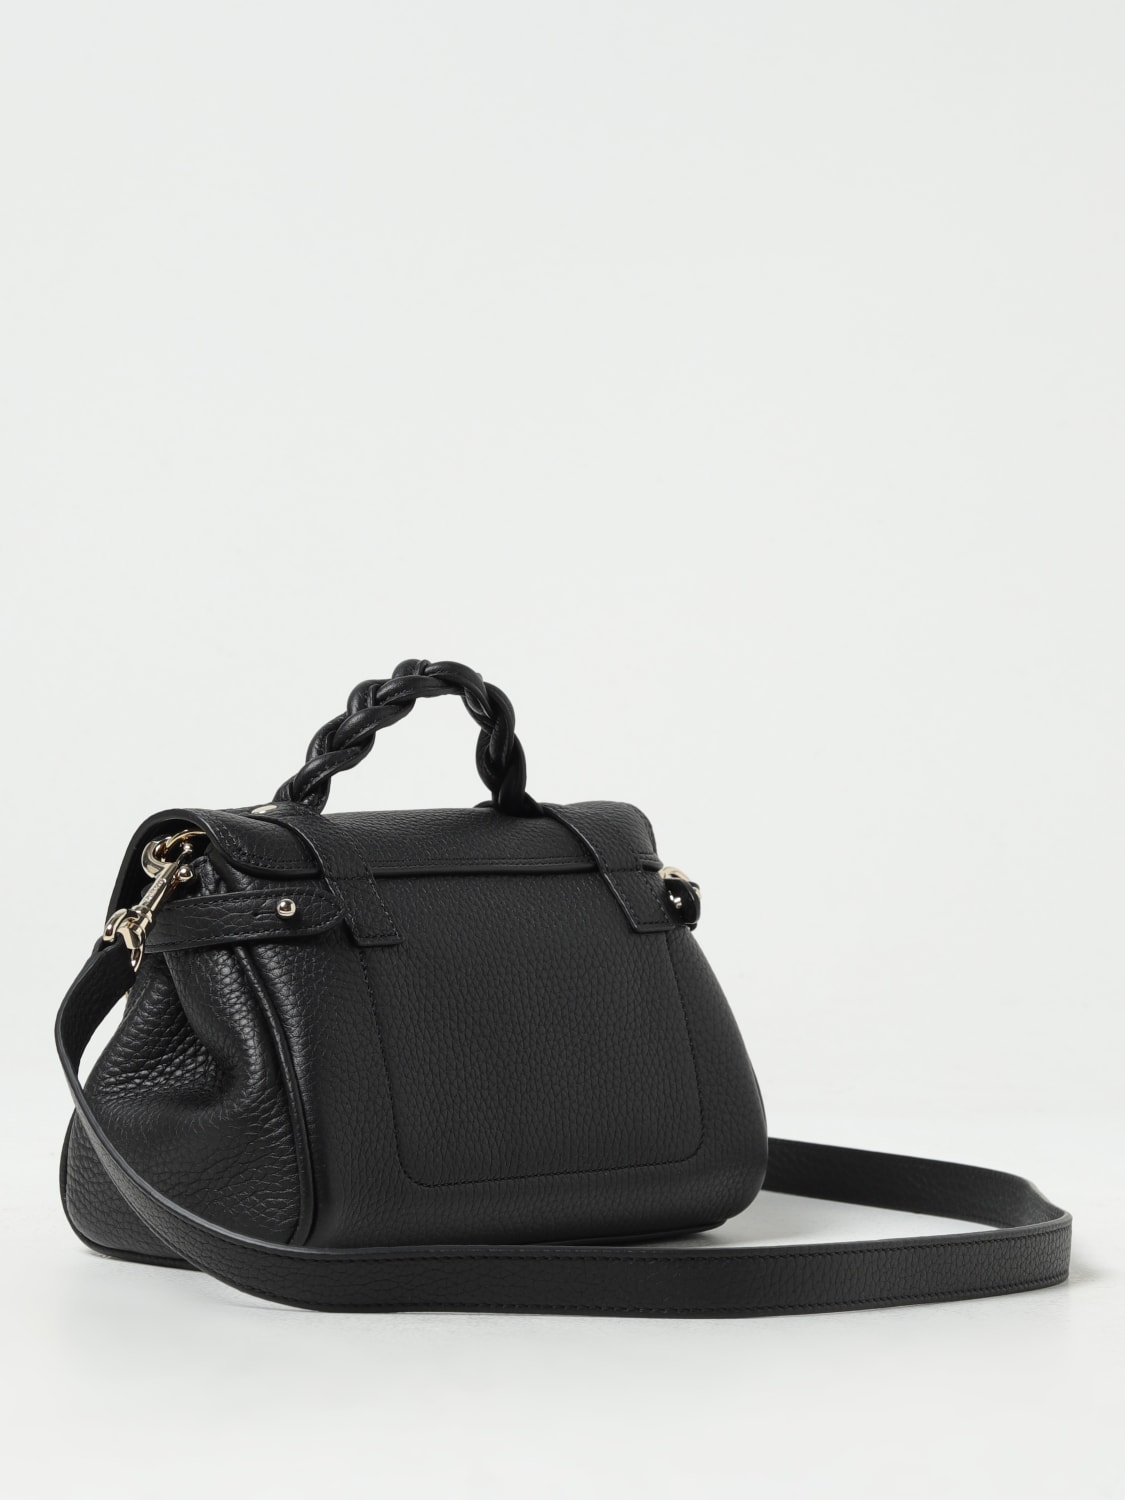 MULBERRY: Alexa bag in grained leather - Black | Mulberry handbag ...